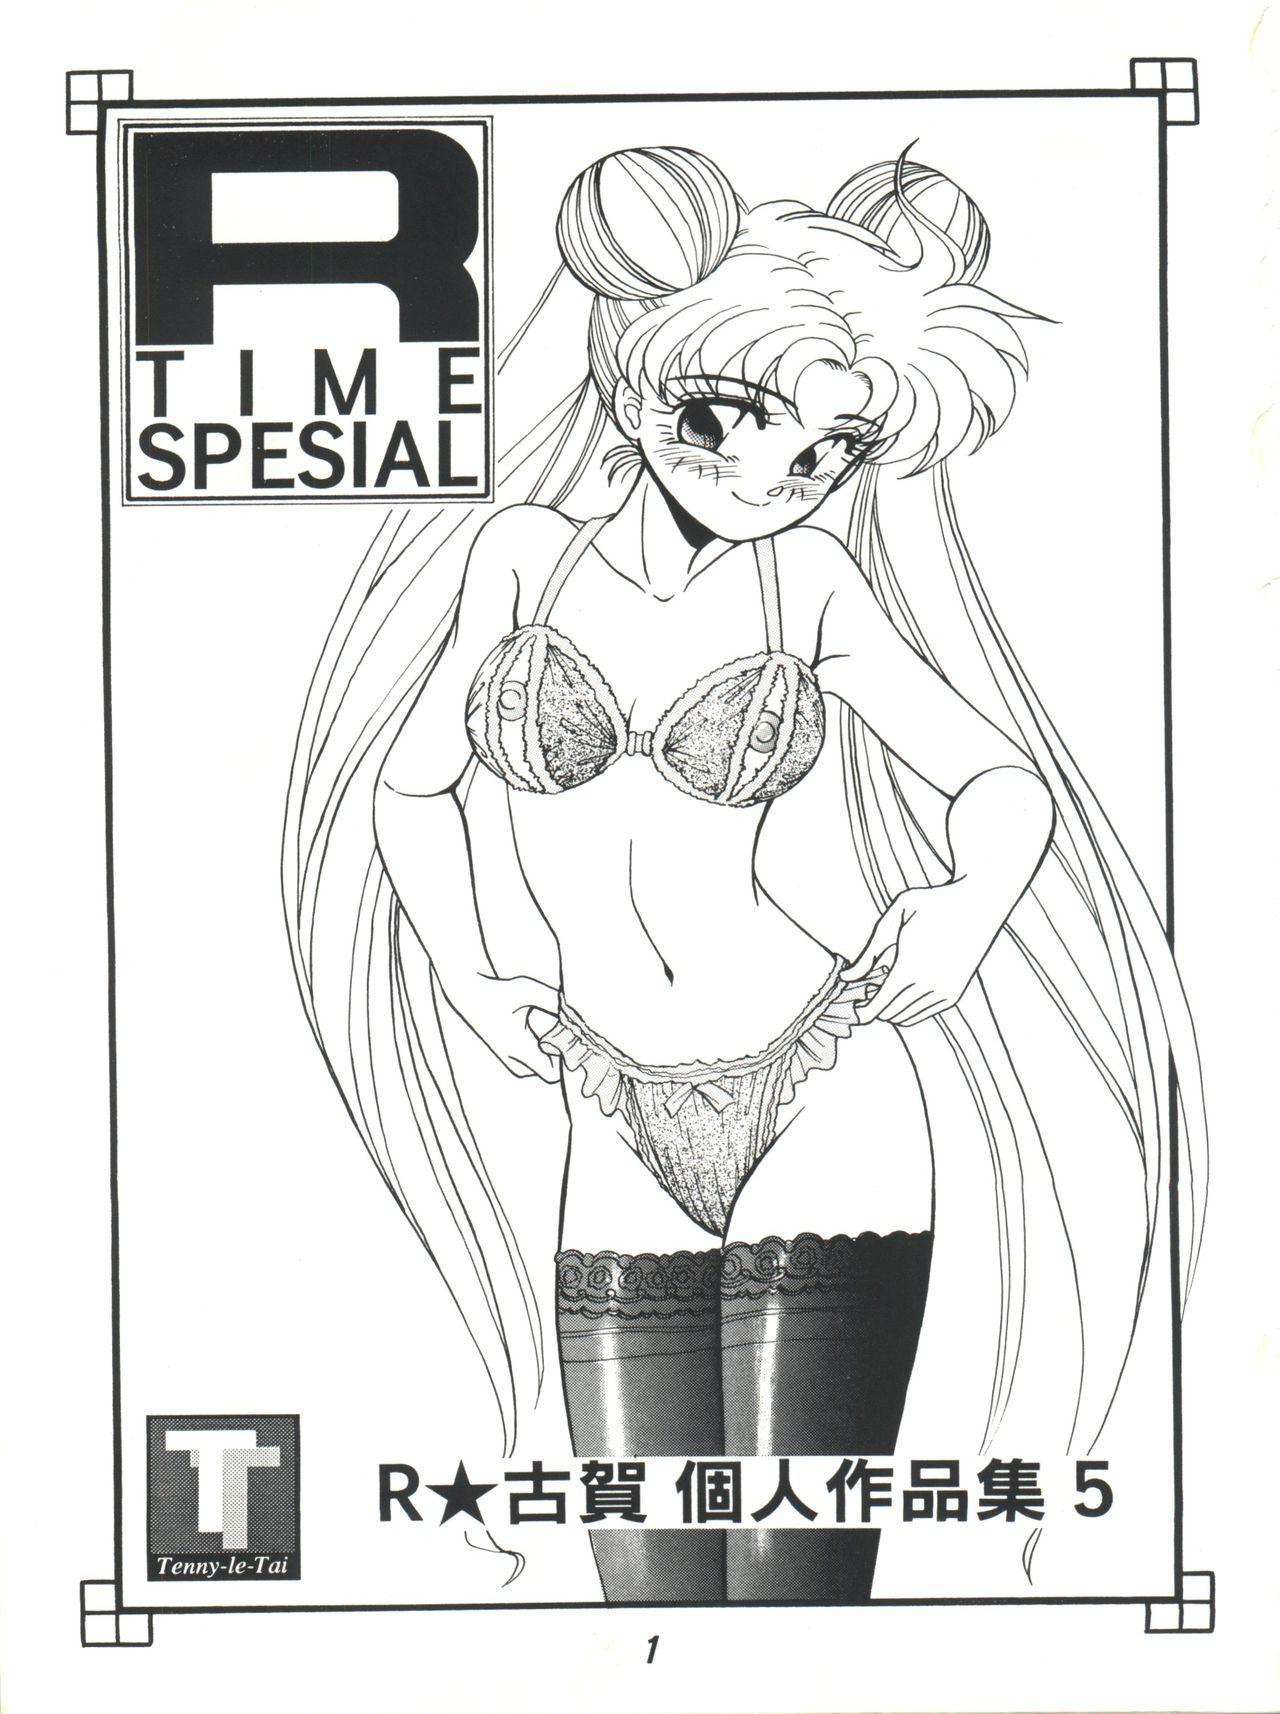 Girl Fuck R Time Special - Sailor moon Ranma 12 3x3 eyes Obi wo gyuttone T Girl - Page 3